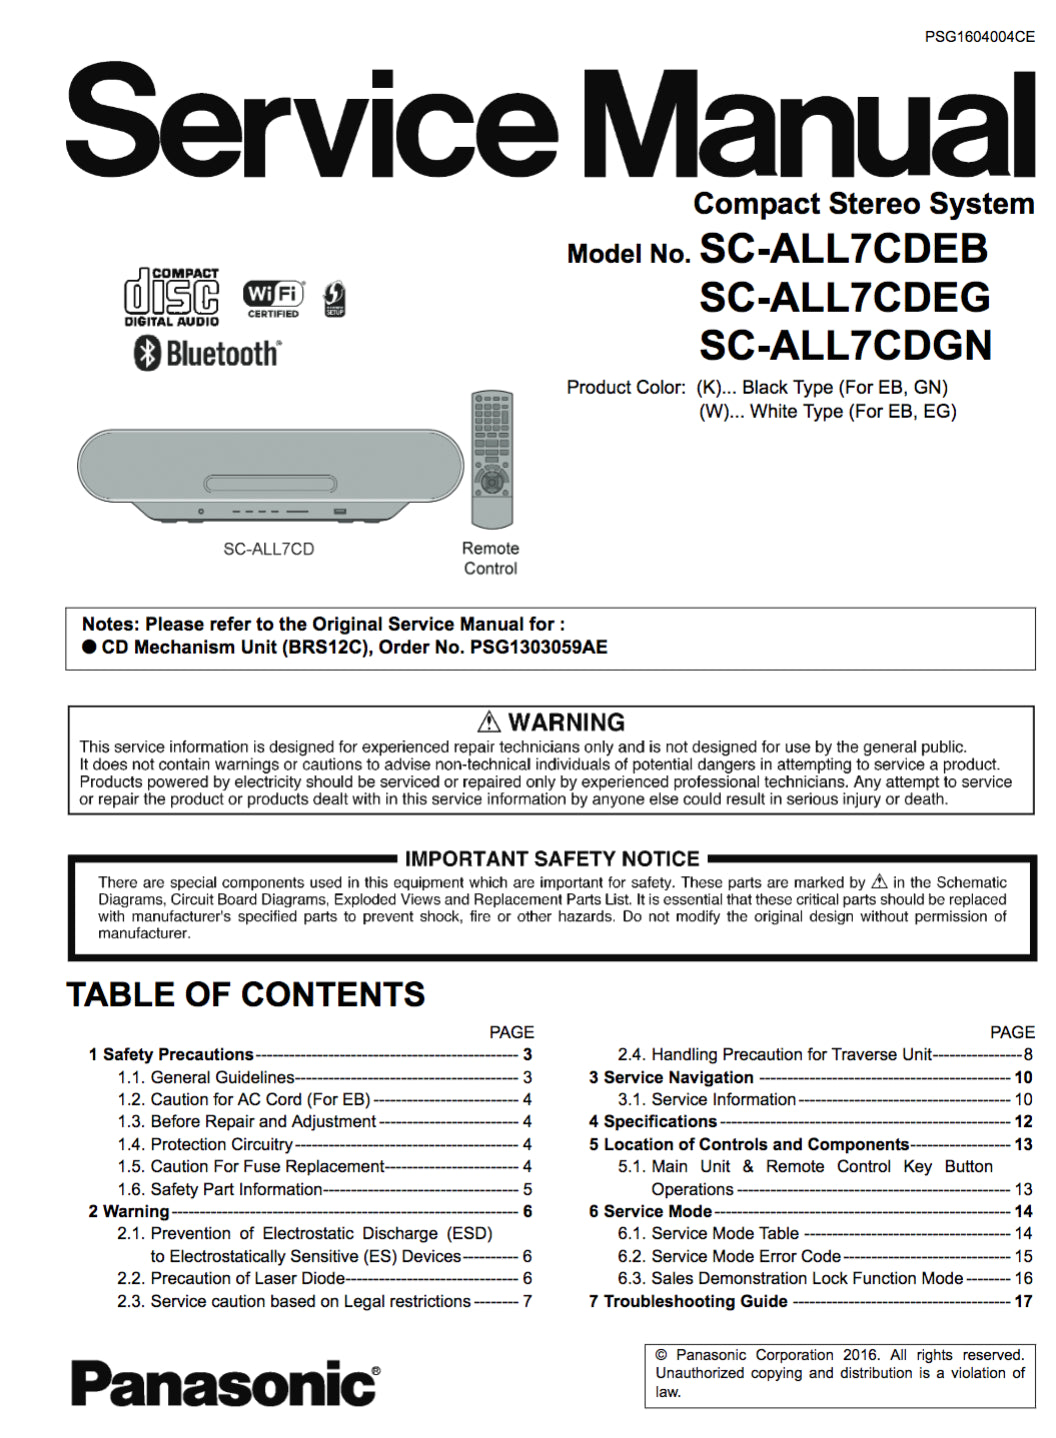 Panasonic Sc All7cdebwggn Service Manual Complete Spared Parts Uk 4266